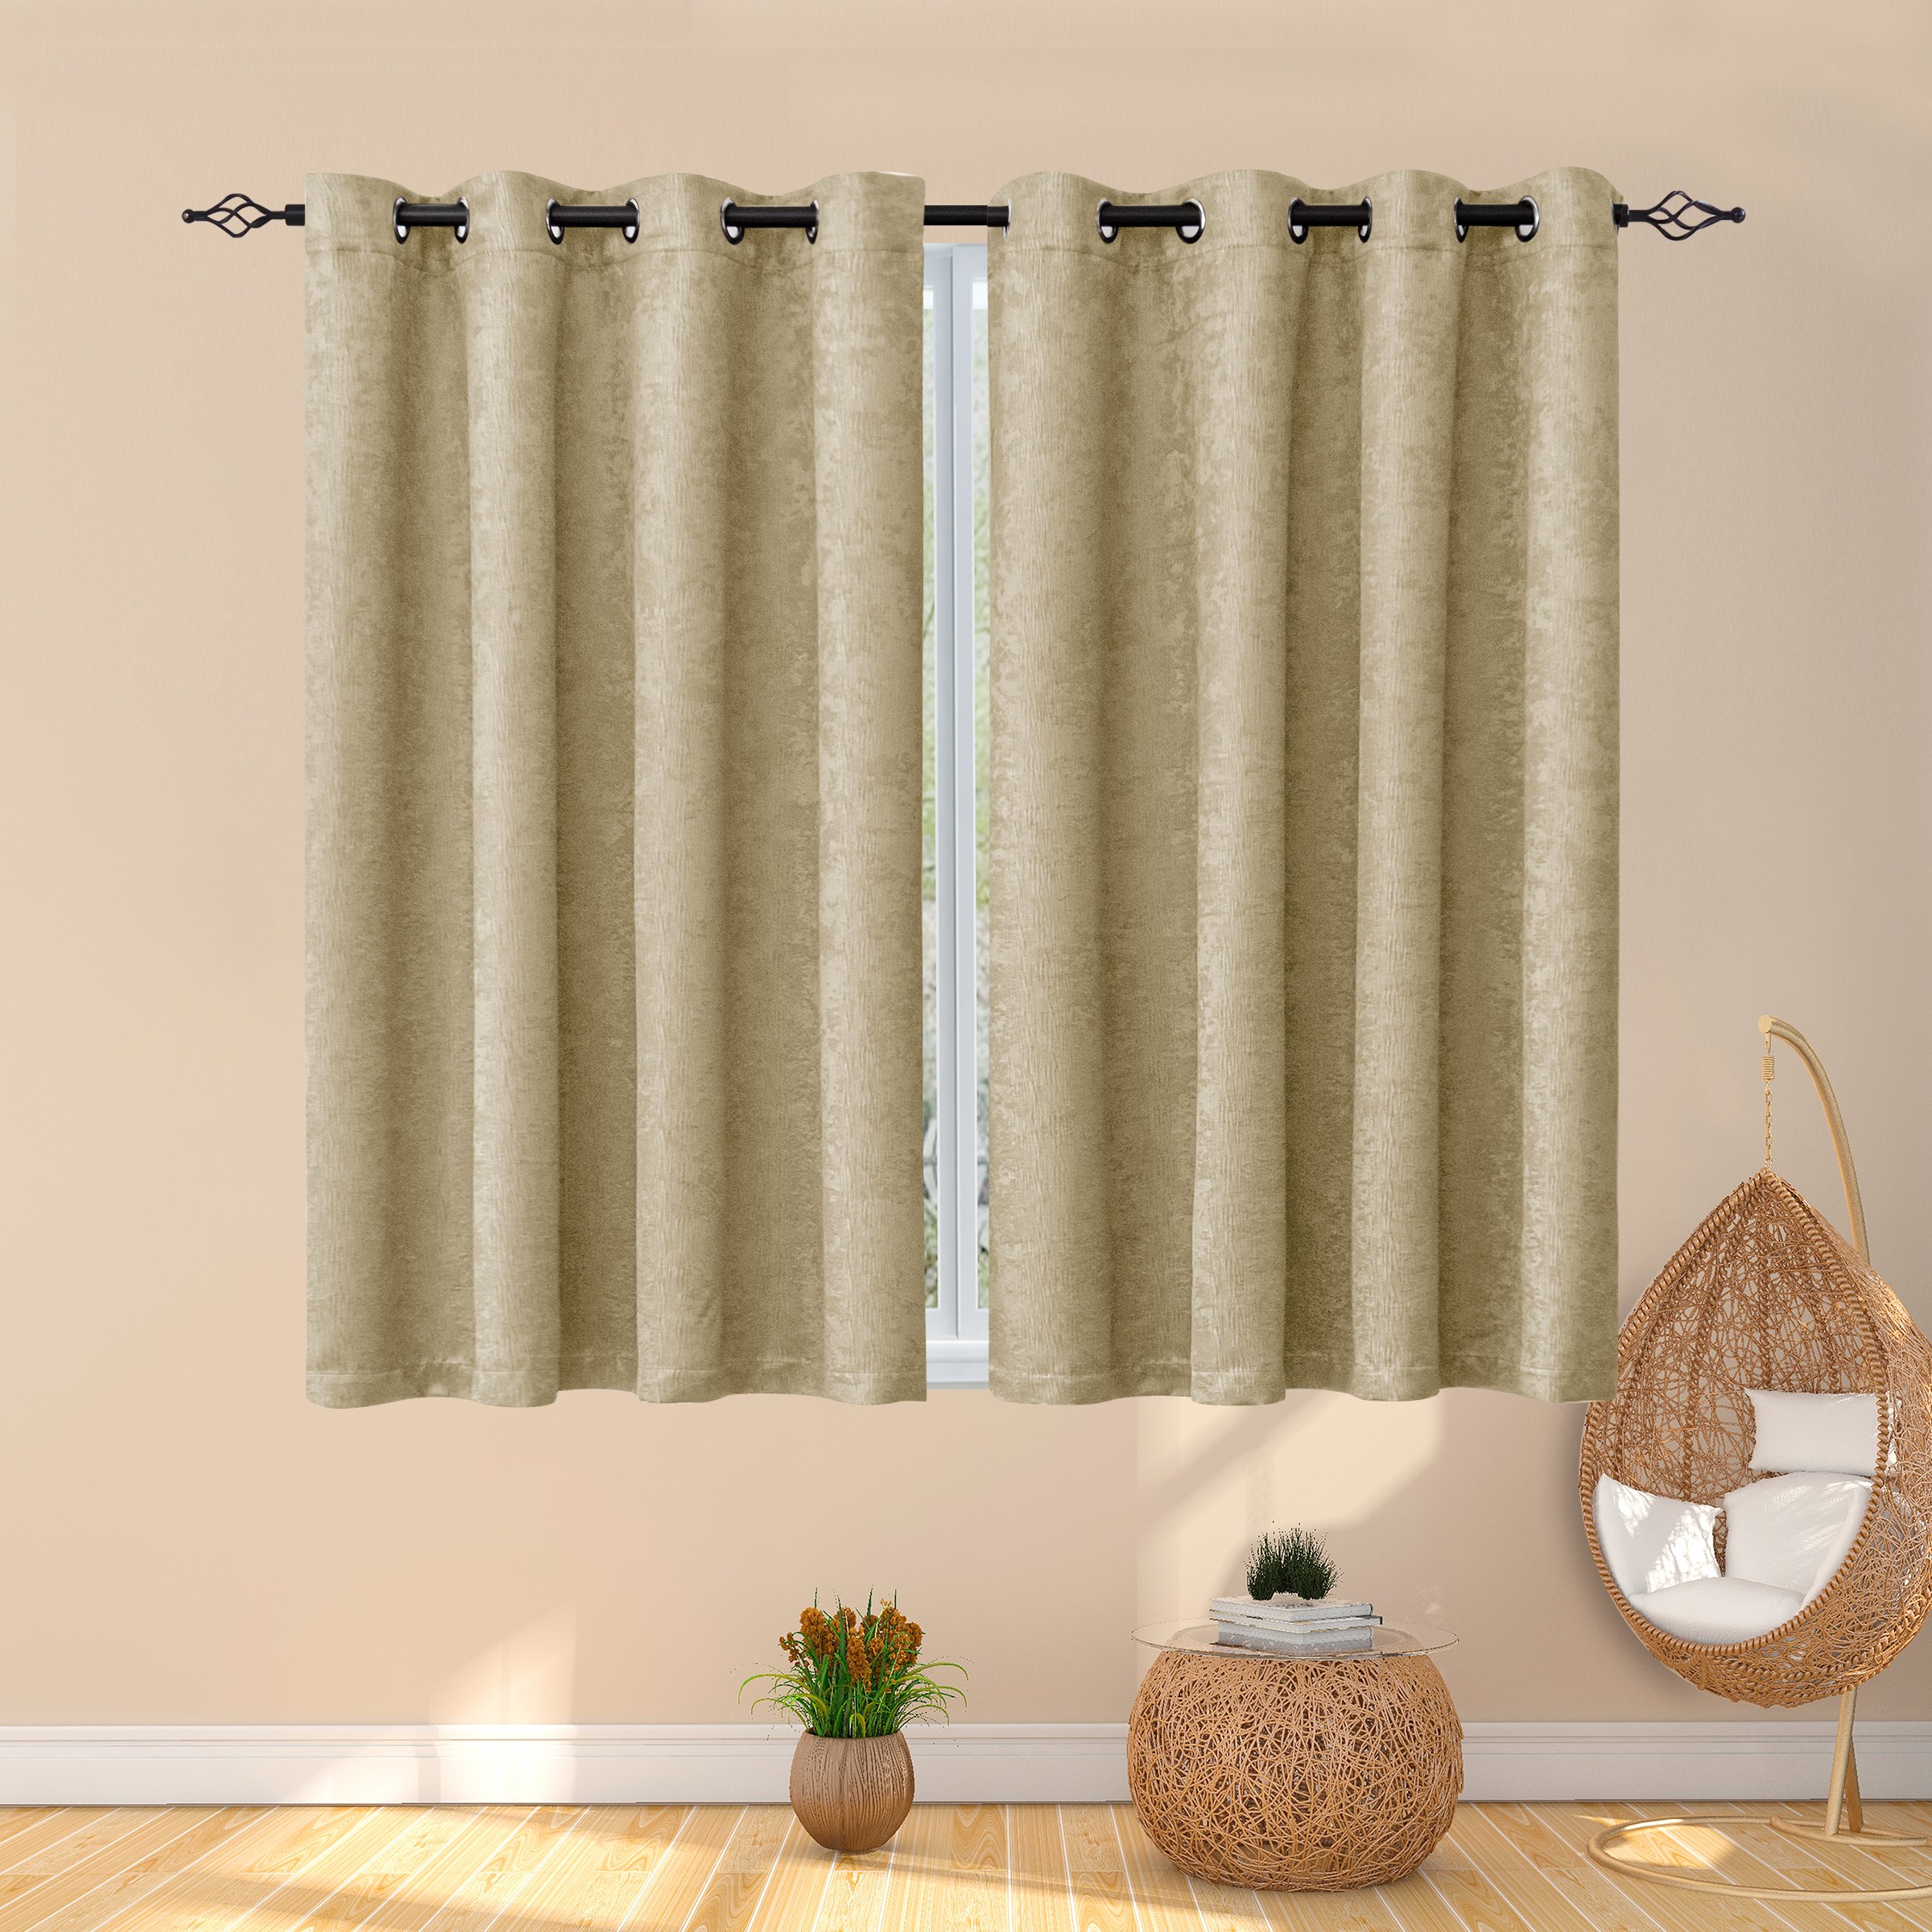 Subrtex Thermal Insulated Grommet Blackout Curtains for Bedroom, Set of 2 Panels, 53"×63", Beige - image 1 of 5